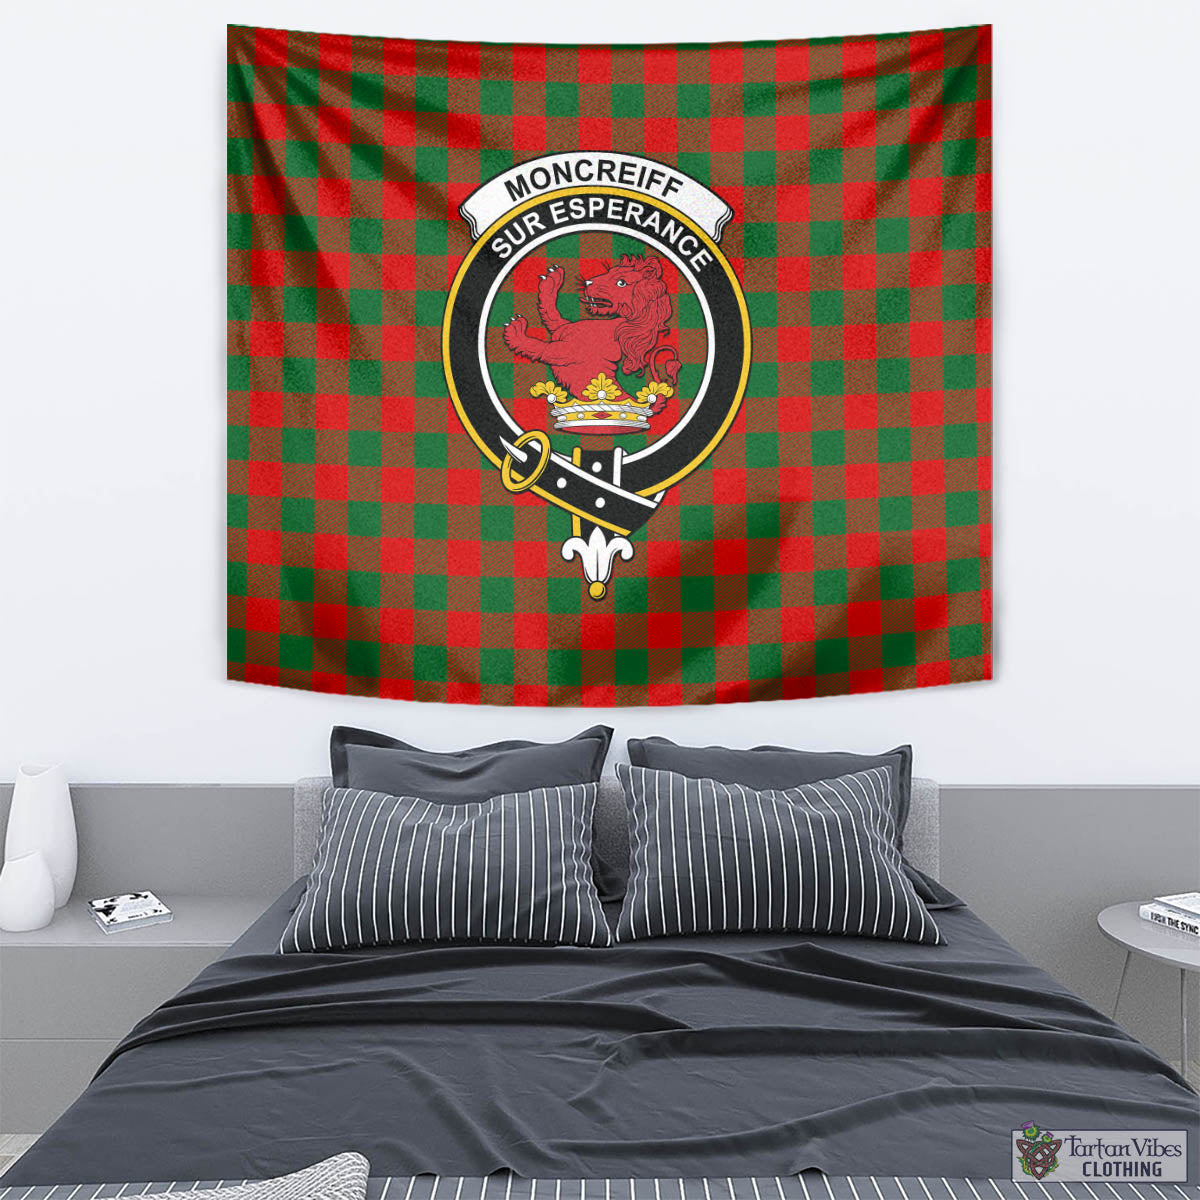 Tartan Vibes Clothing Moncrieff Modern Tartan Tapestry Wall Hanging and Home Decor for Room with Family Crest